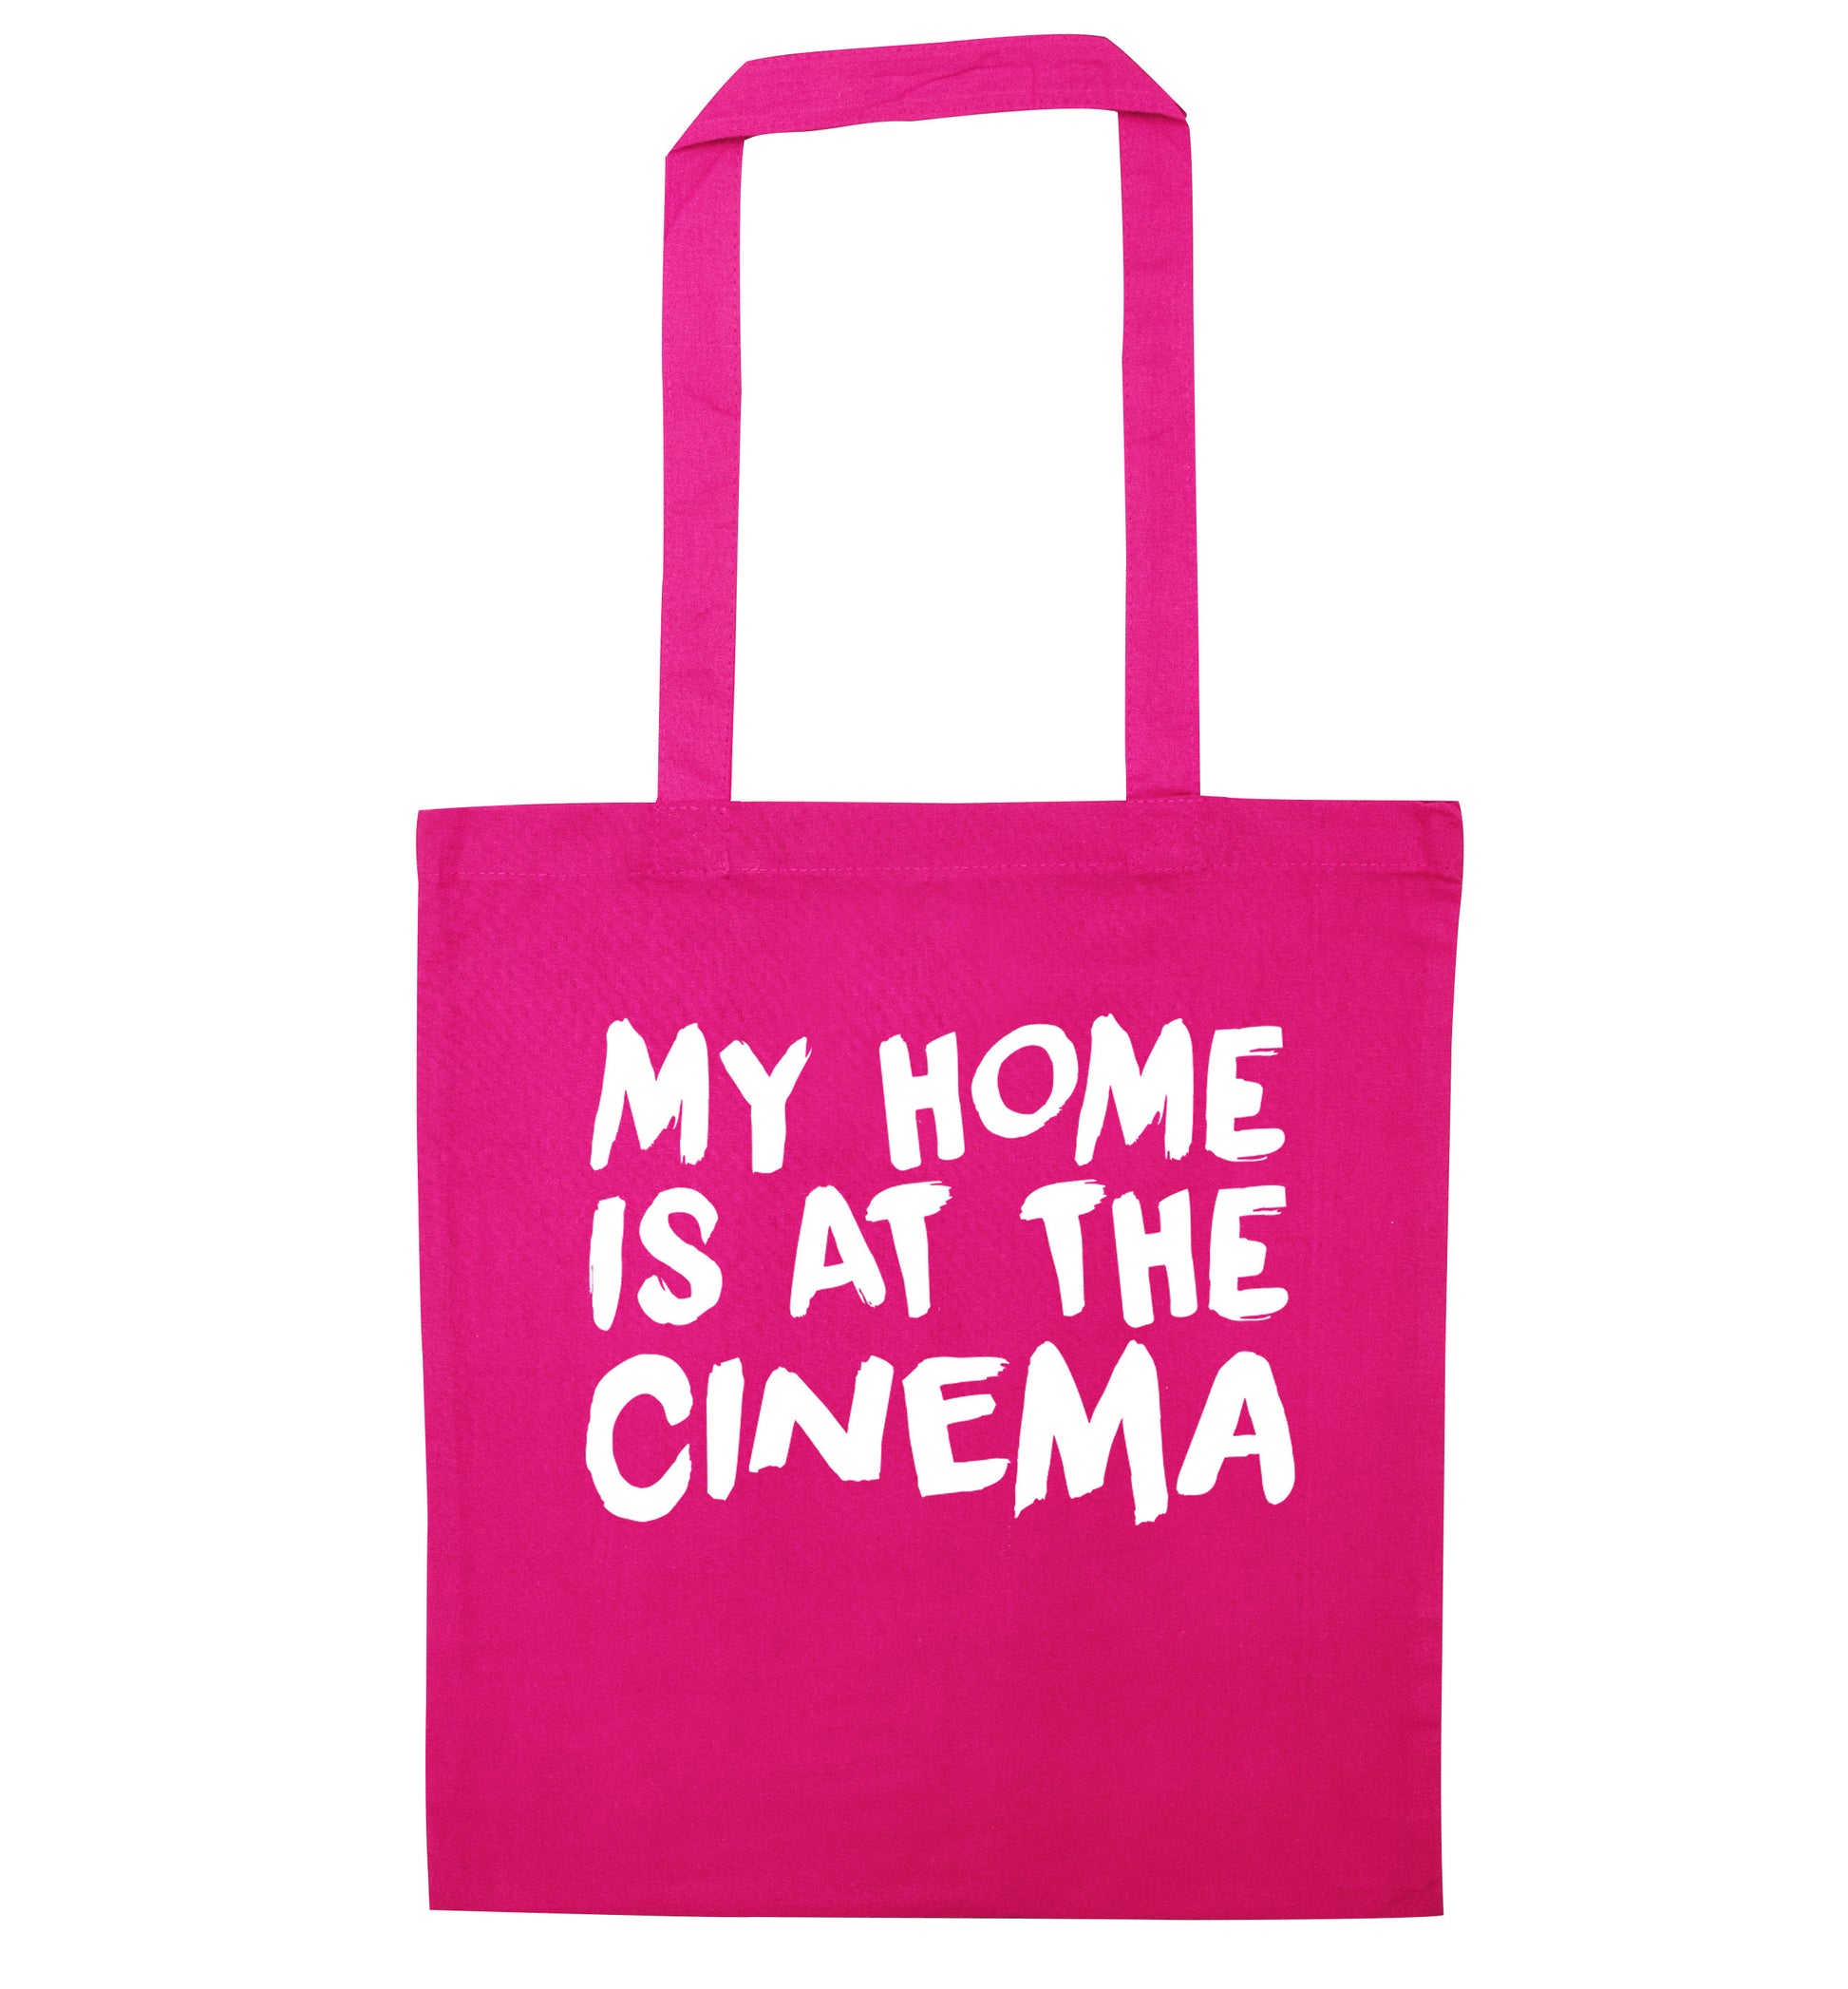 My home is at the cinema pink tote bag